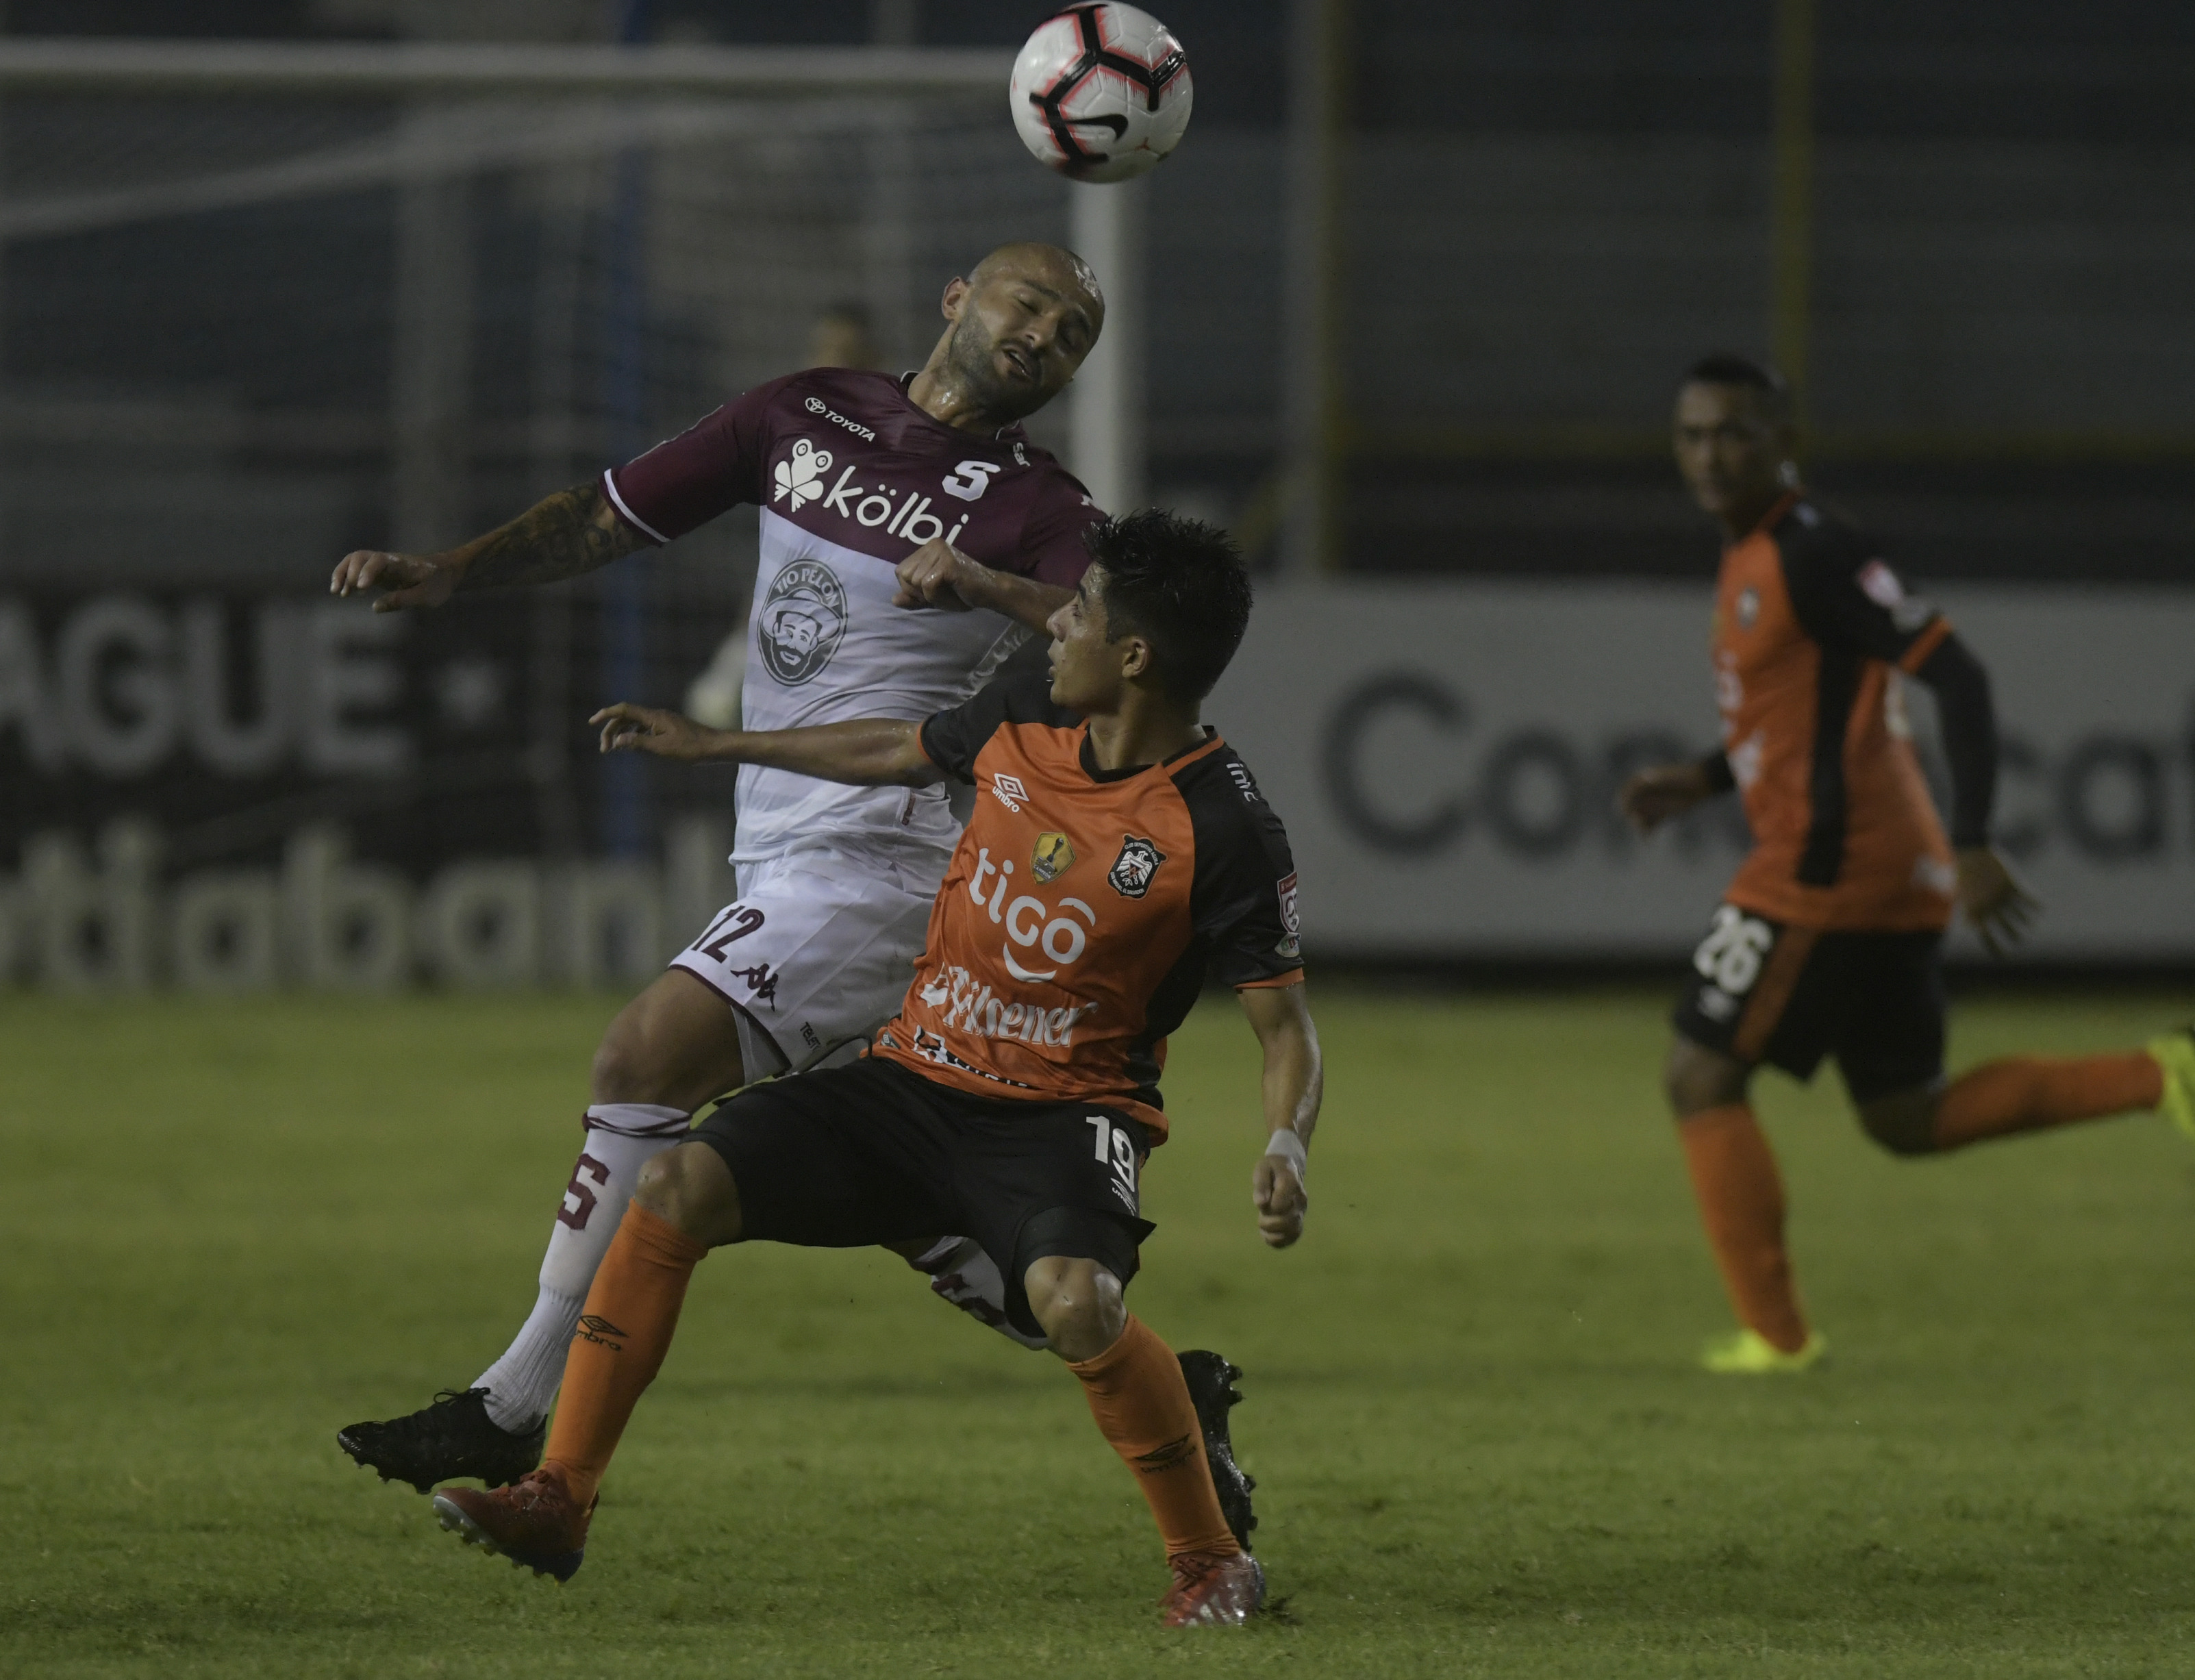 Herediano Champions Cup-bound on Faerron's late winner